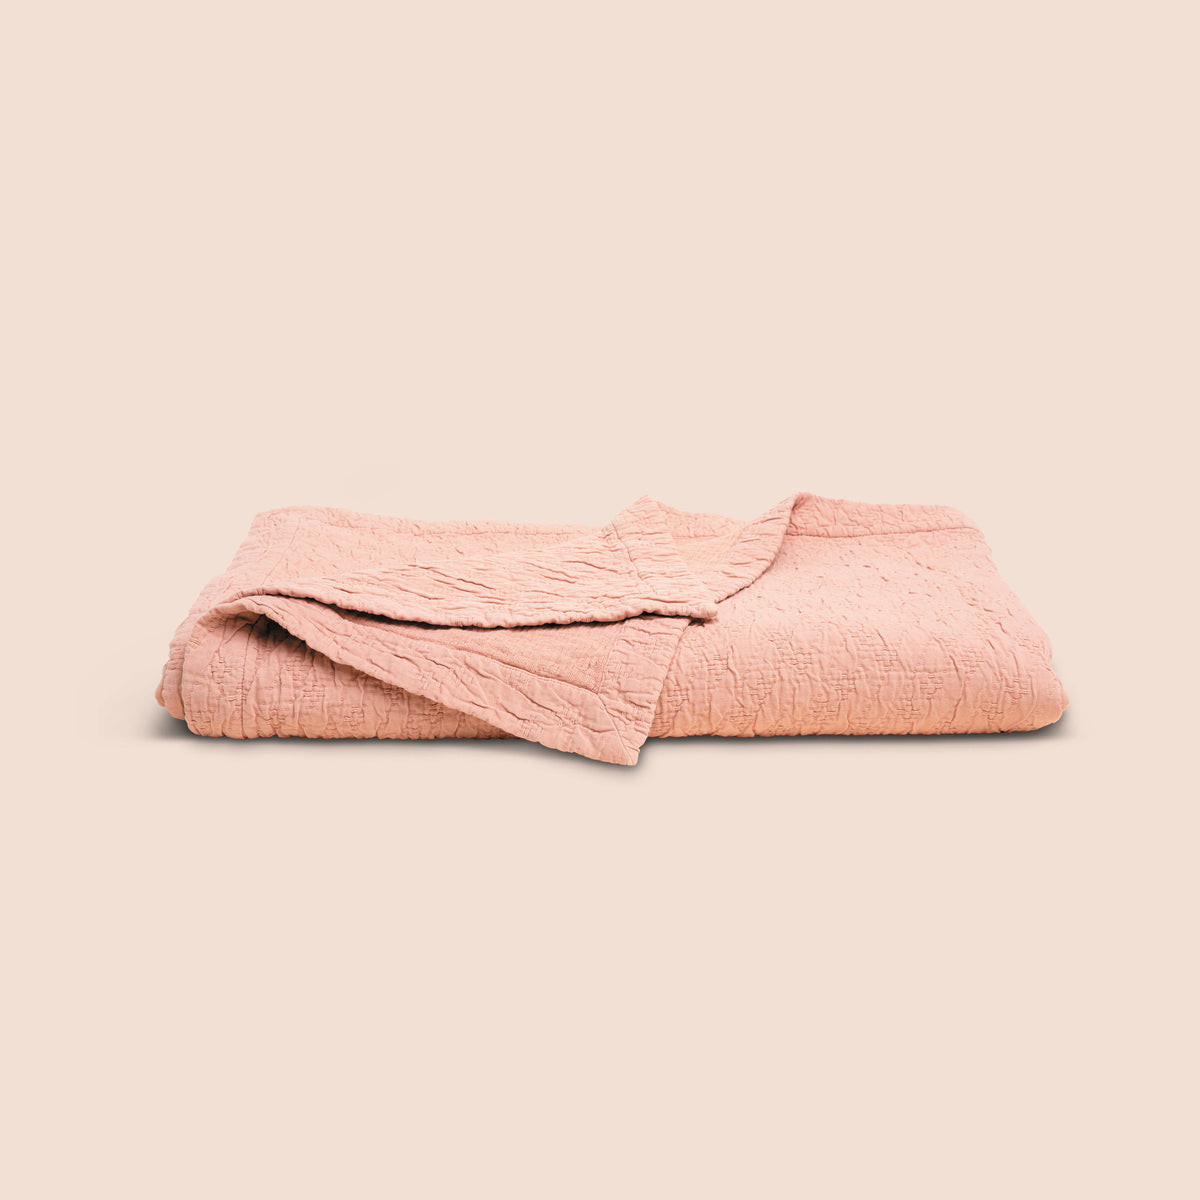 Image of the Pink Sandstone Wave Coverlet neatly folded with the back right corner folded forward on a light pink background